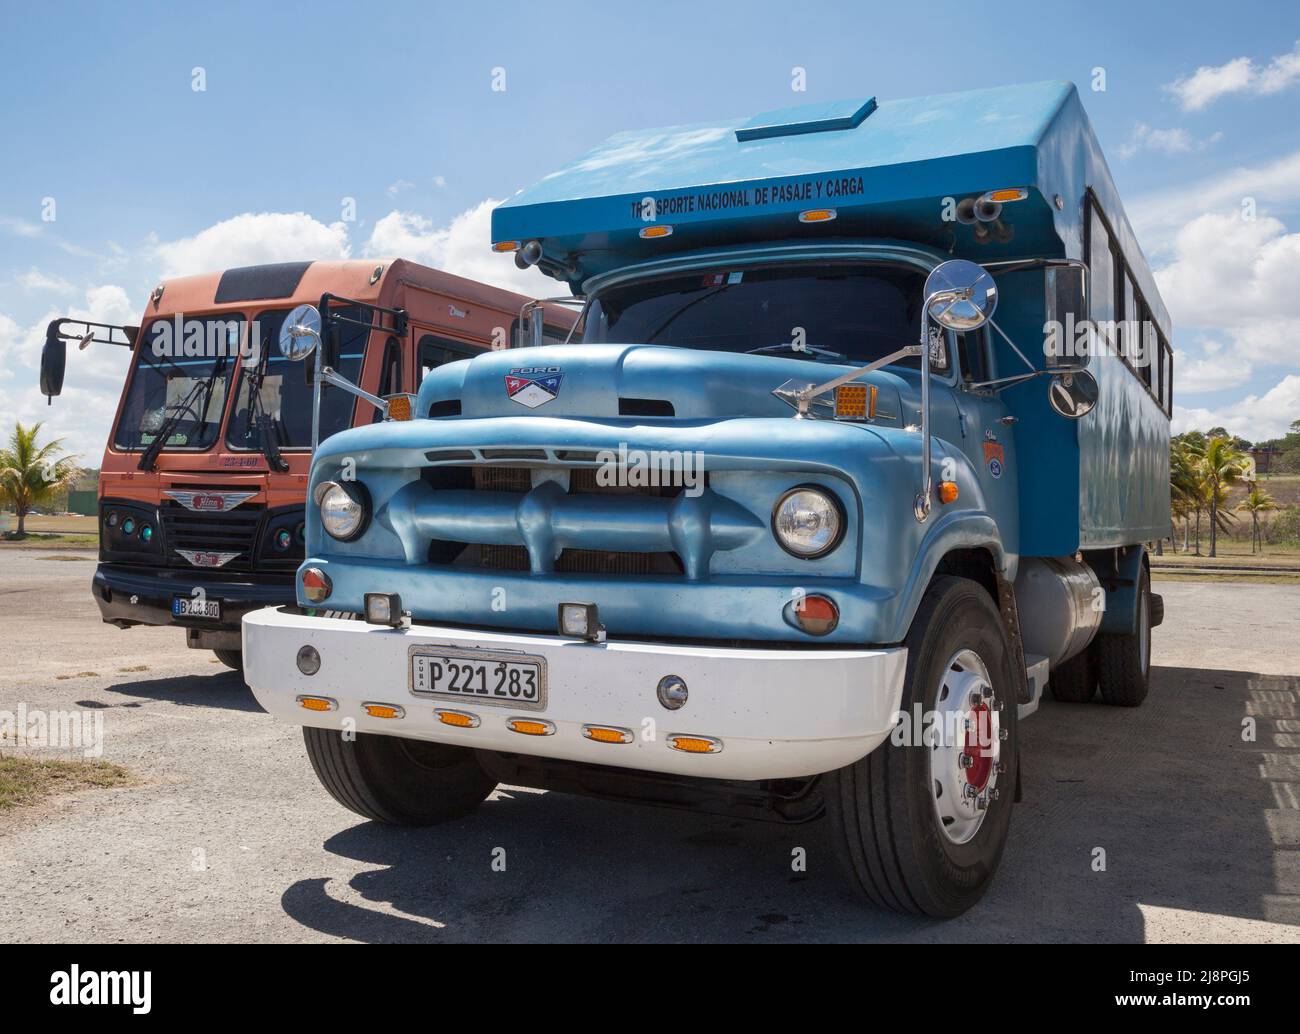 1950s Ford Camion truck bus, Cuba. Due to the embargo vintage trucks are repurposed with bench seats as rudimentary public transport. Stock Photo